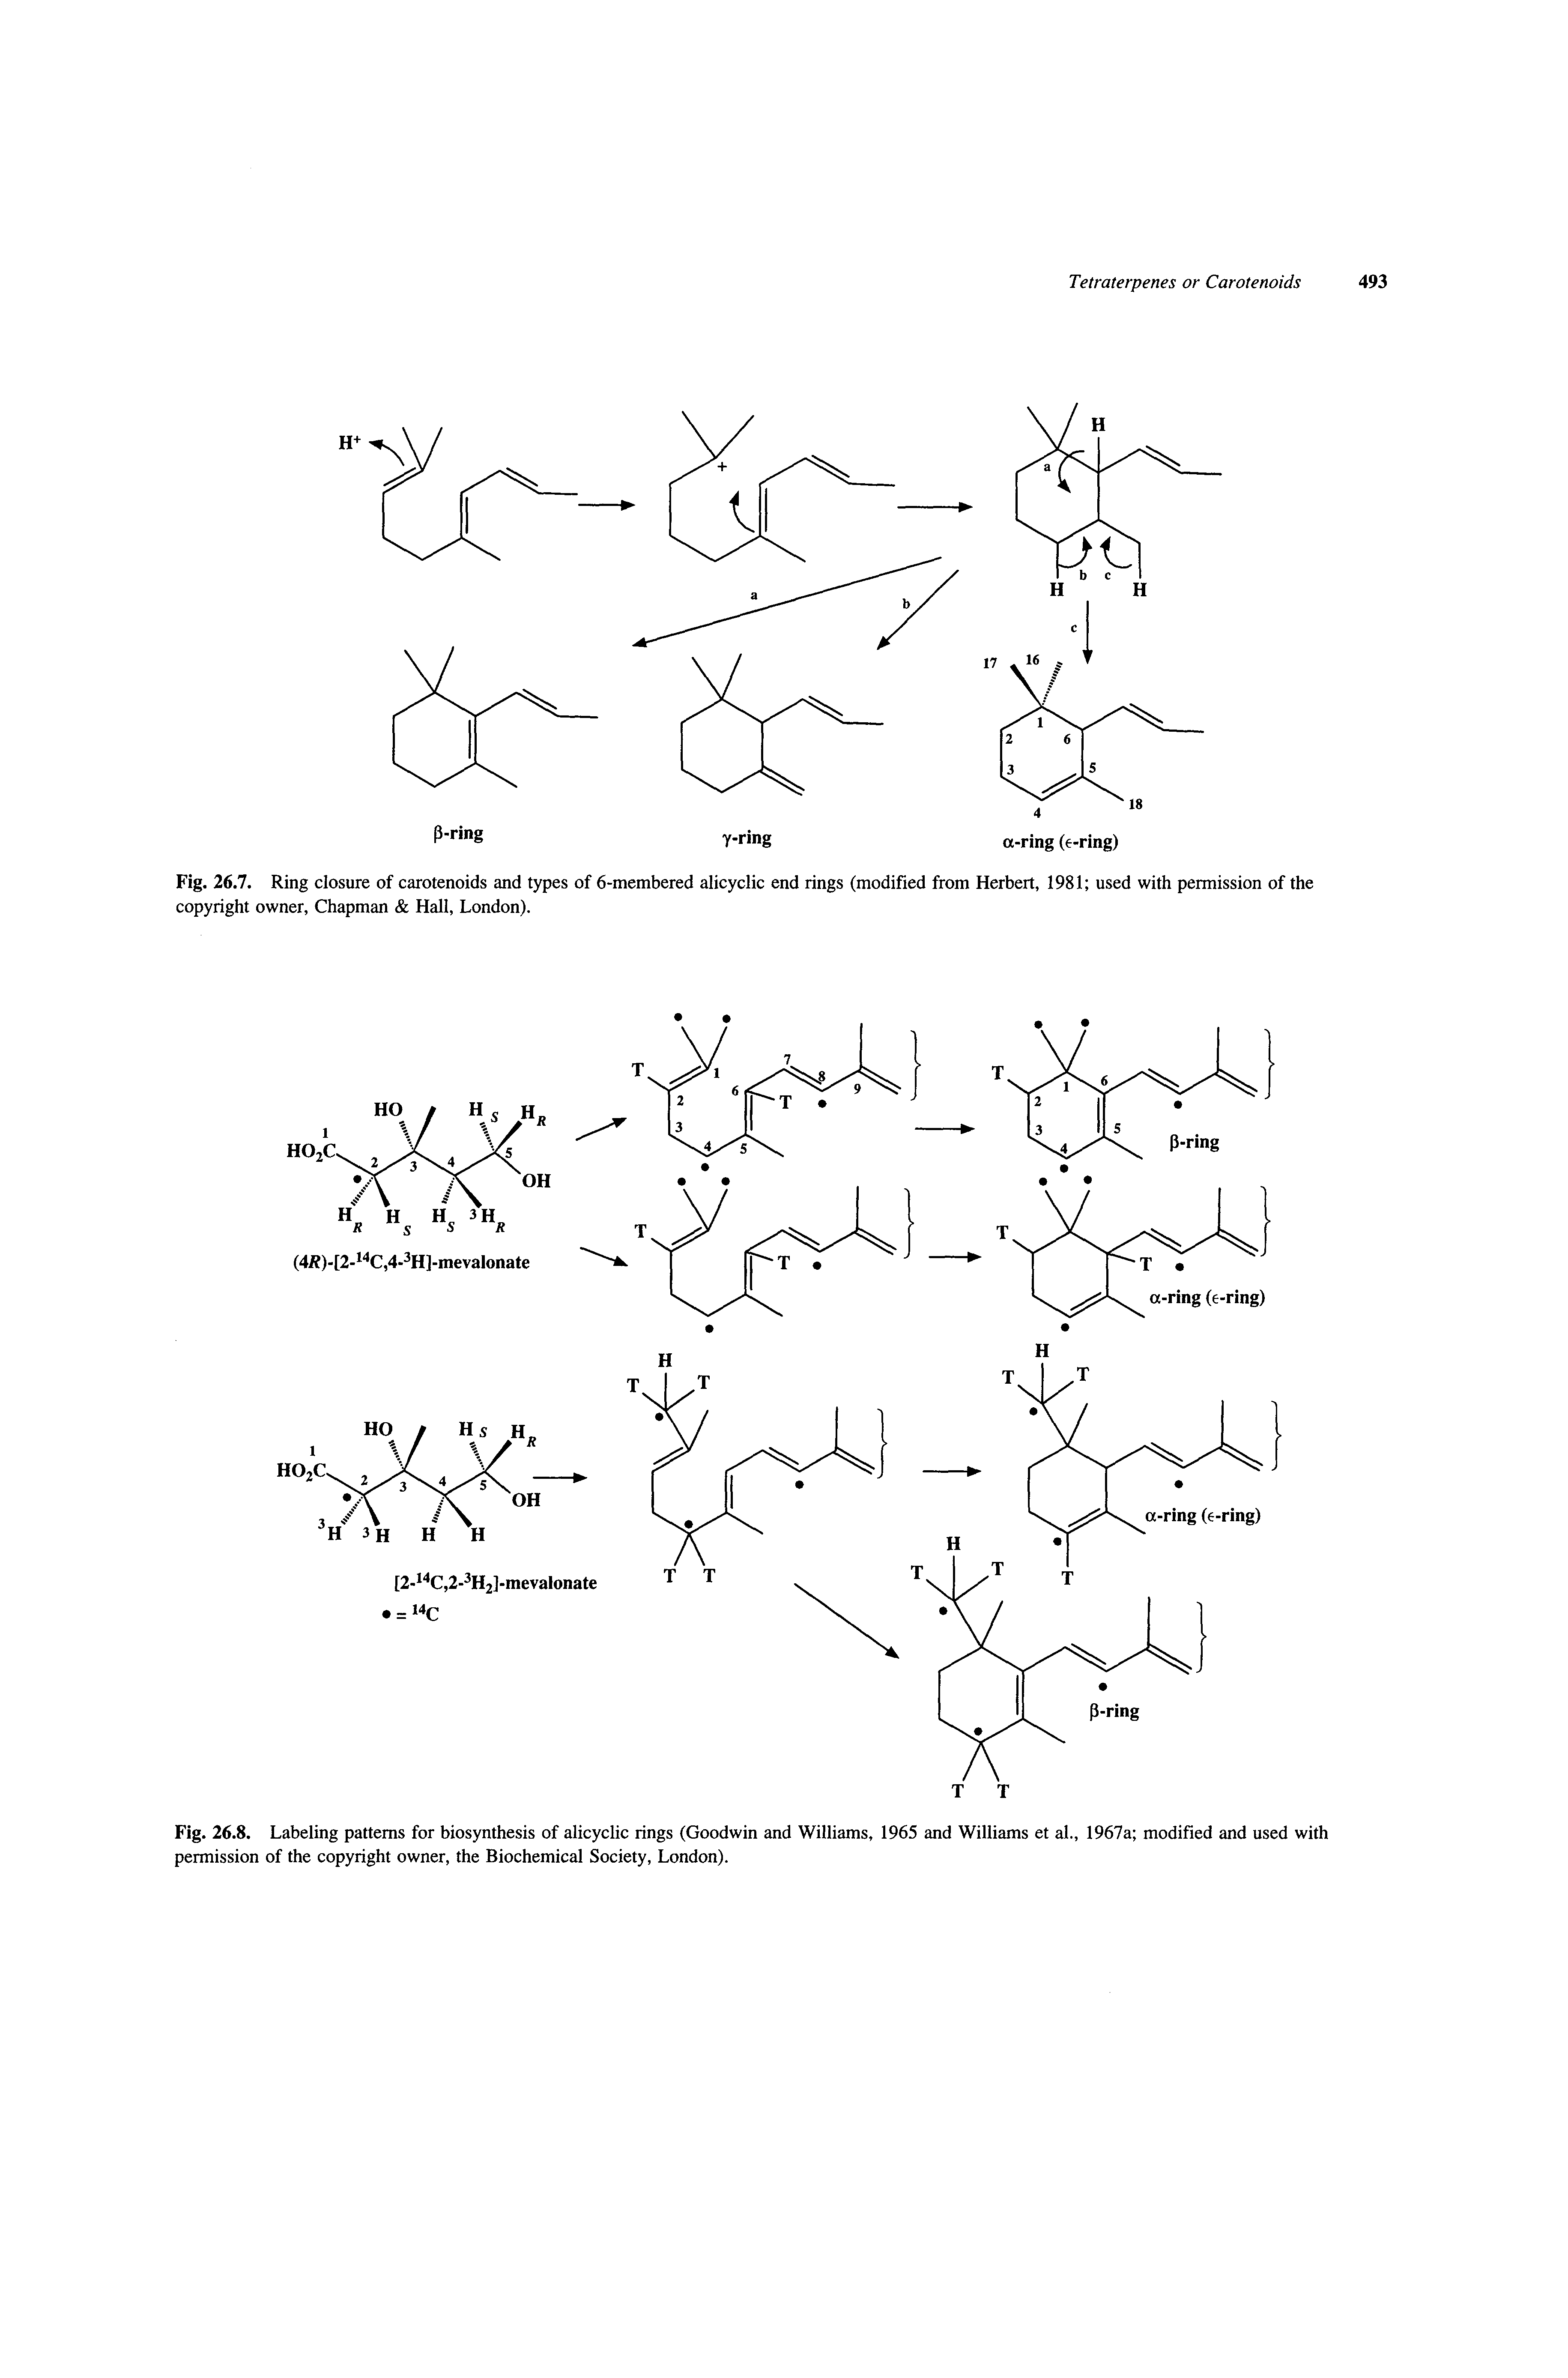 Fig. 26.8. Labeling patterns for biosynthesis of alicyclic rings (Goodwin and Williams, 1965 and Williams et al., 1967a modified and used with permission of the copyright owner, the Biochemical Society, London).